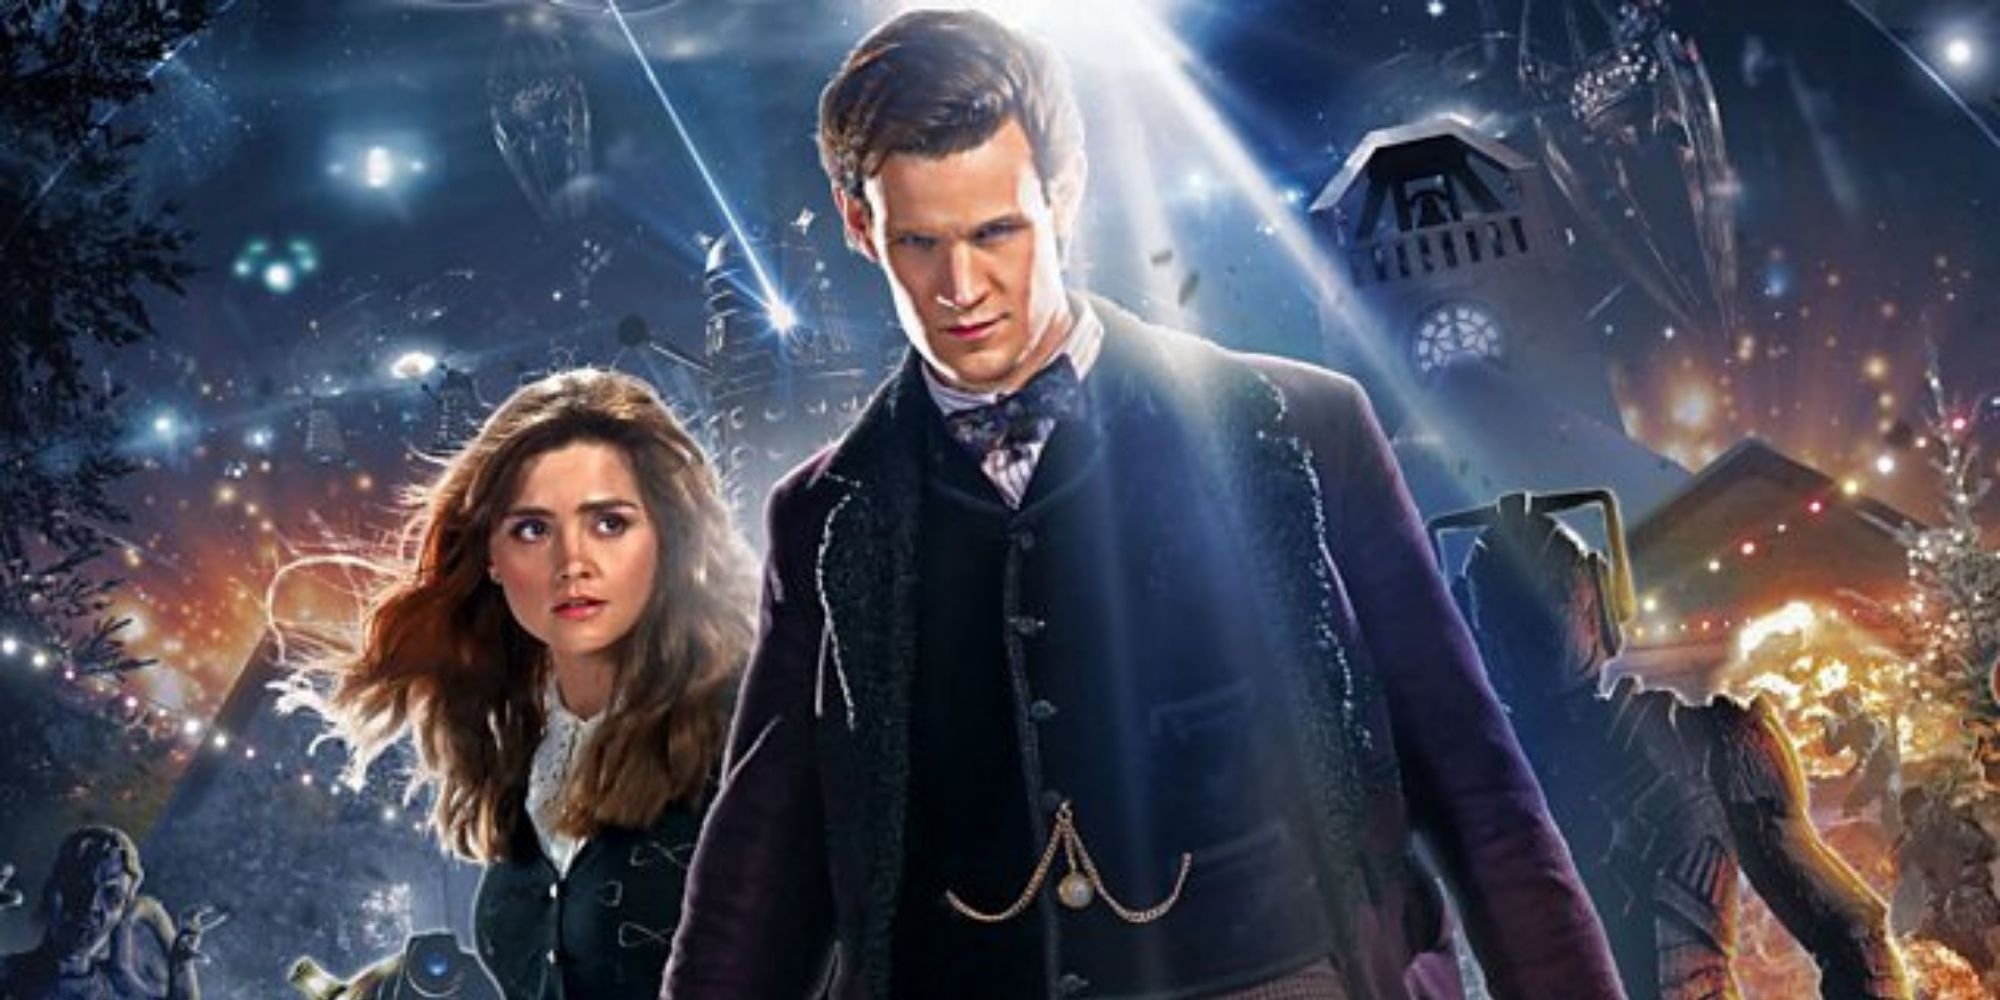 Screenshot of the episode The Time of the Doctor from the TV show Doctor Who.